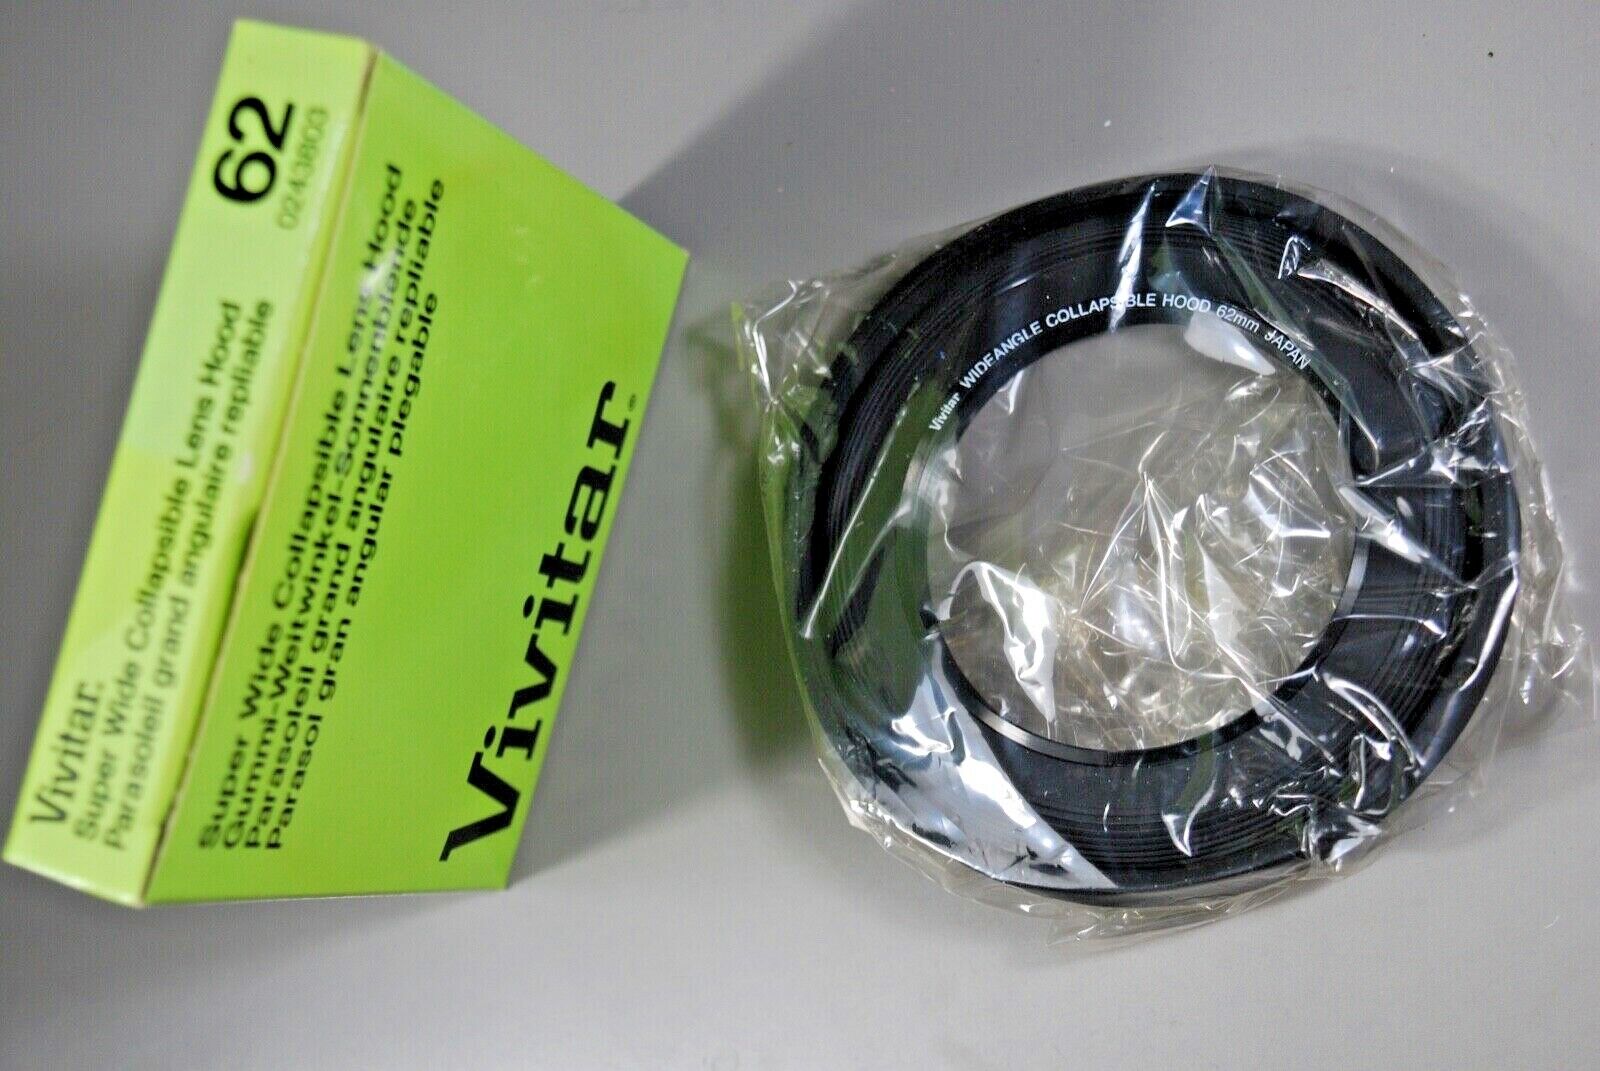 New VIVITAR 62mm SCREW in SUPER  WIDE ANGLE COLLAPSIBLE RUBBER L